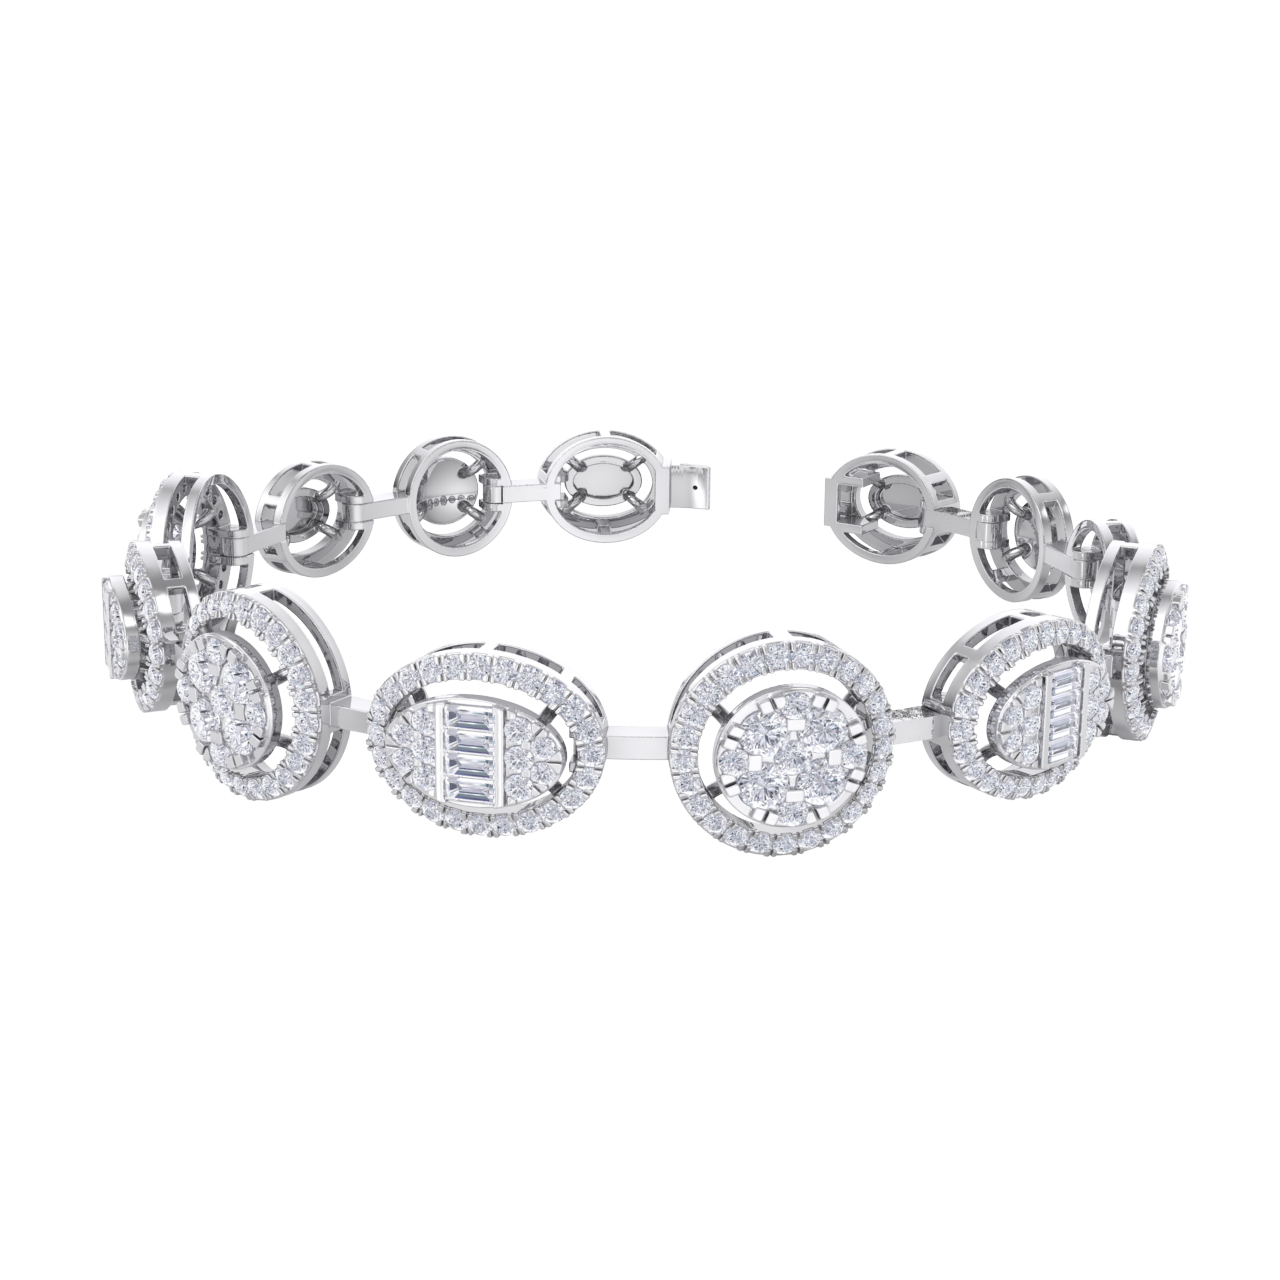 Statement bracelet in white gold with white diamonds of 2.94 ct in weight